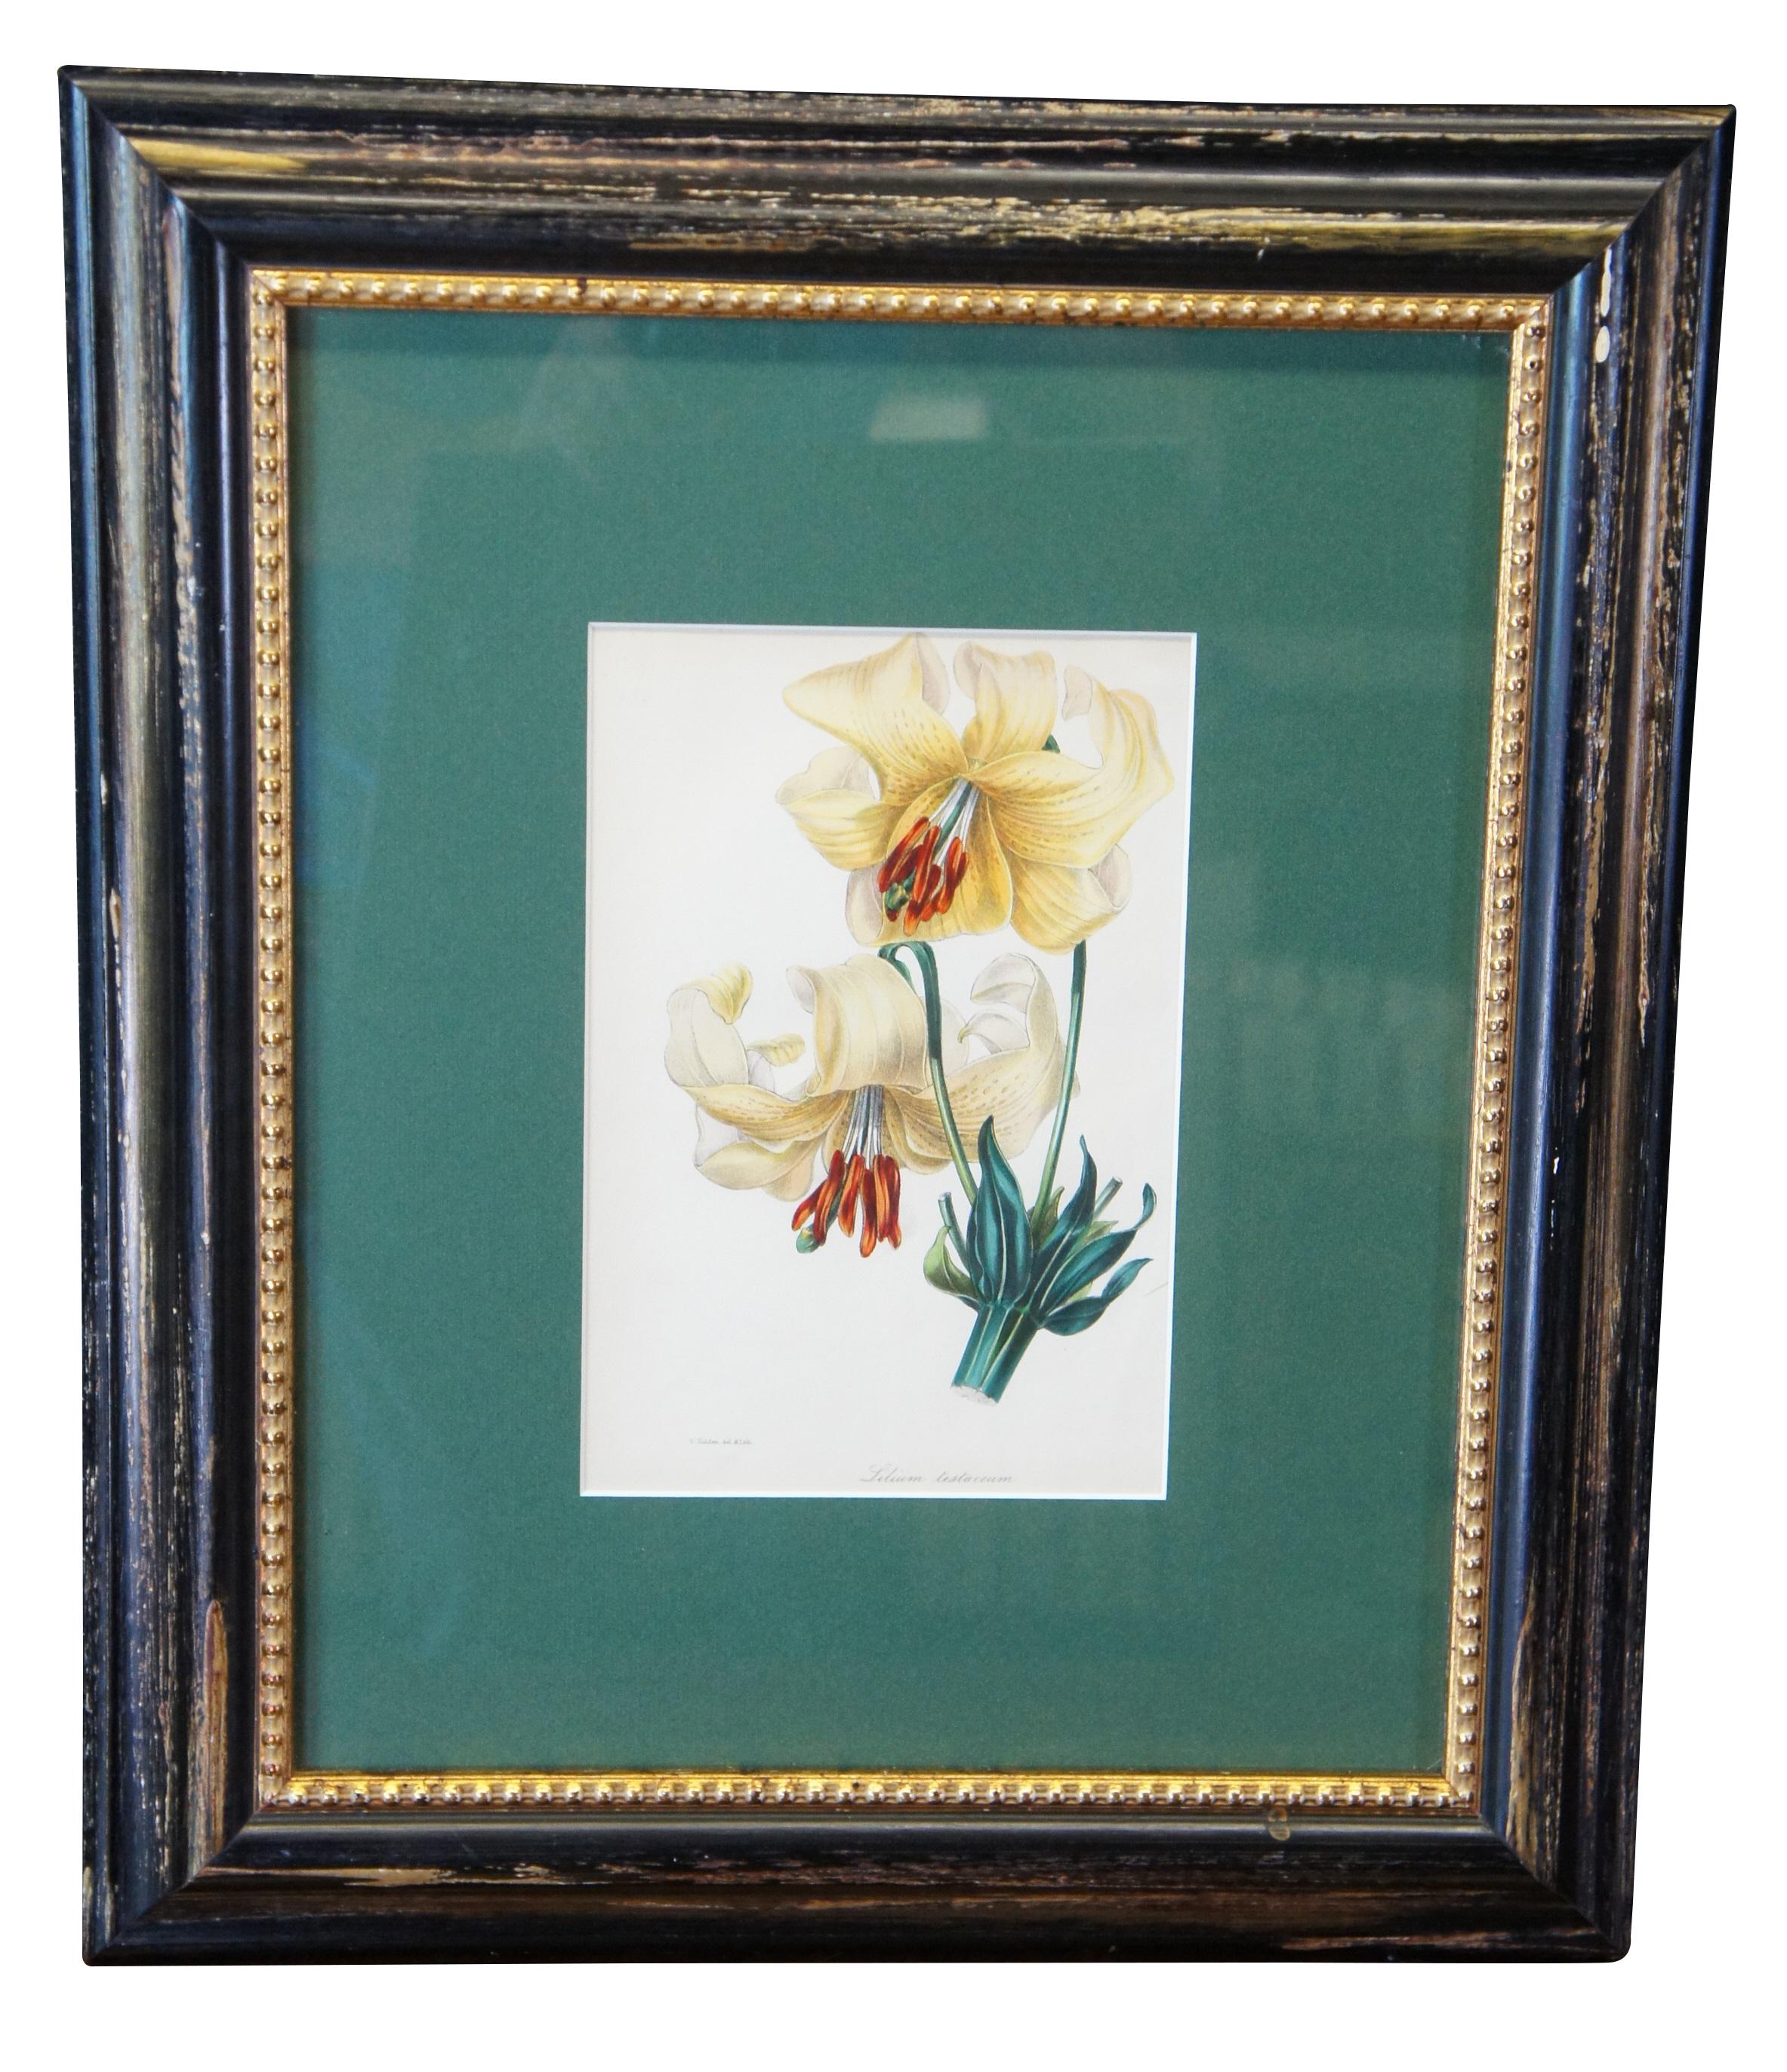 Aeschynanthus longiflorus & Lilium testaceum, circa 1849 by Samuel Holden.  Each lithograph is hand colored and set in a green mat beneath glass.  The frame is made from wood with black finish and gold beaded accents.  
Samuel Holden (British,